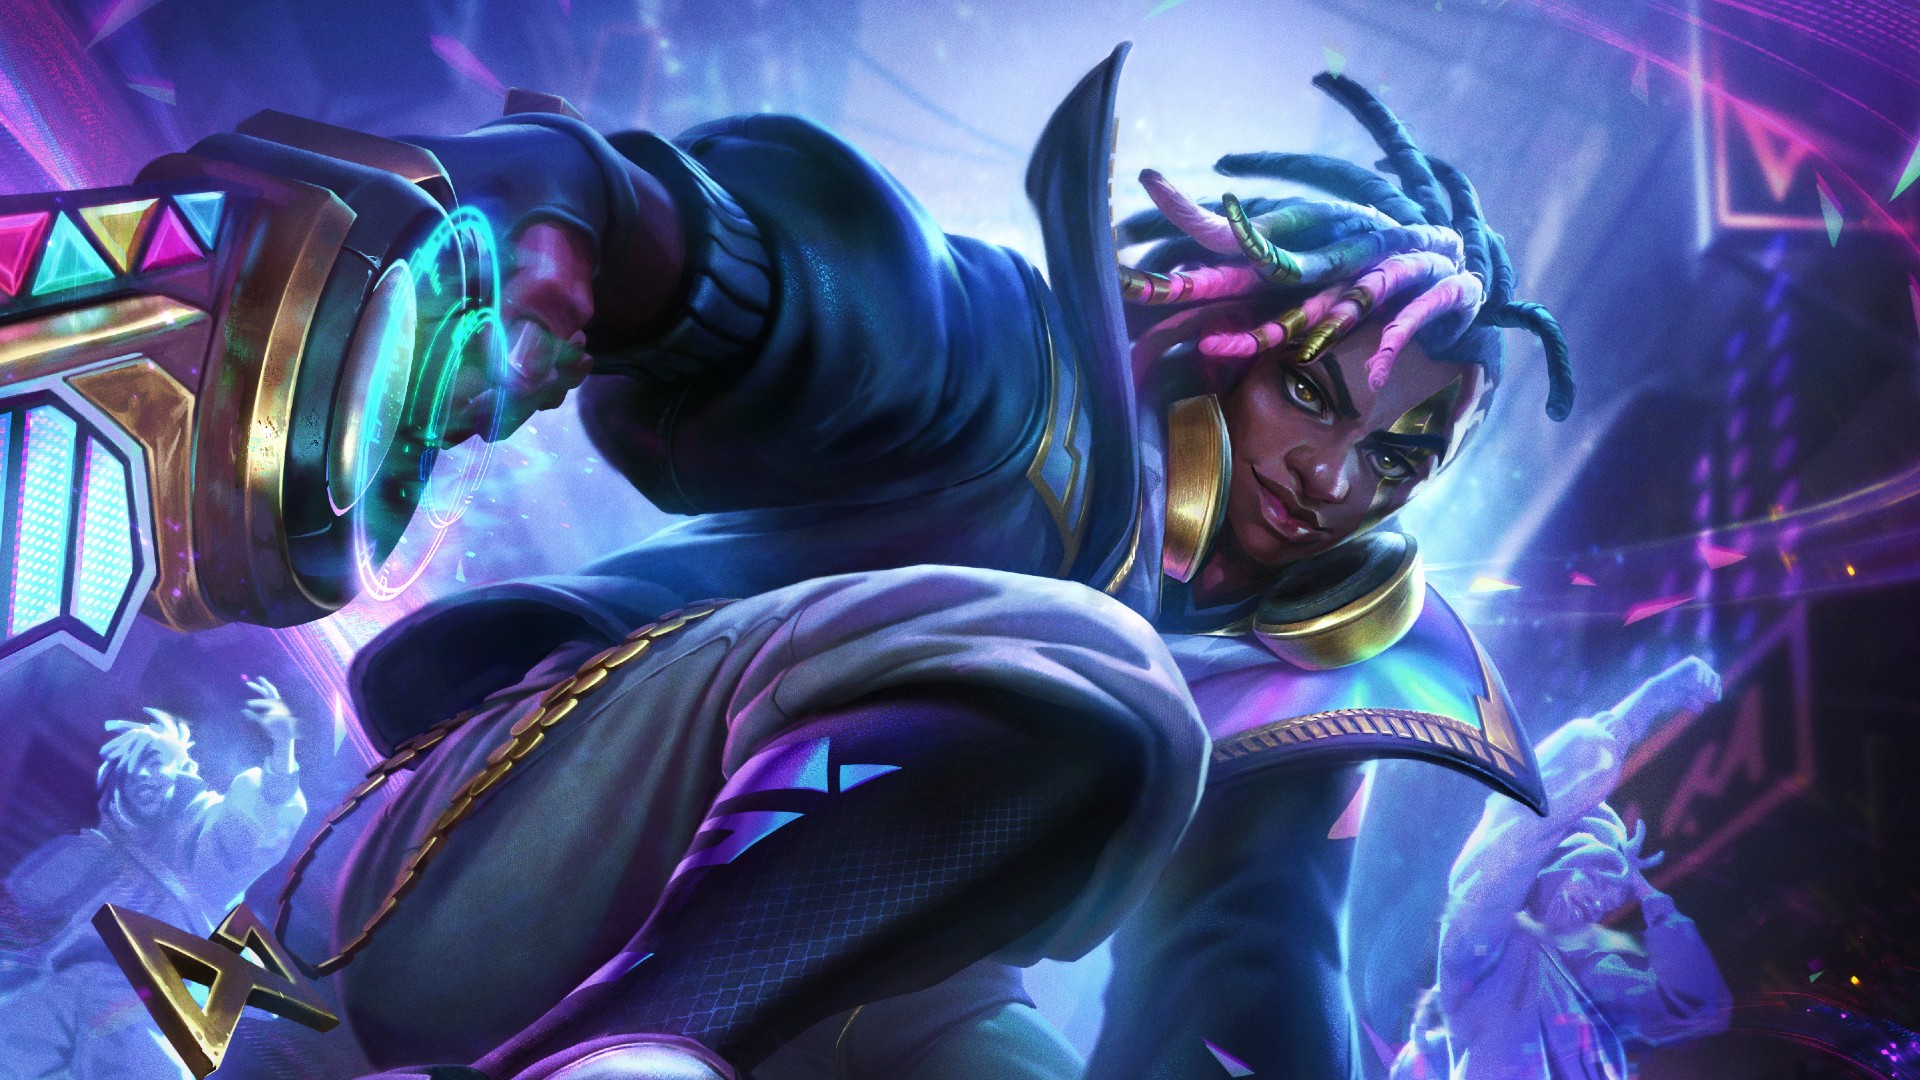 There's a new $200 League of Legends chroma, and there might be more